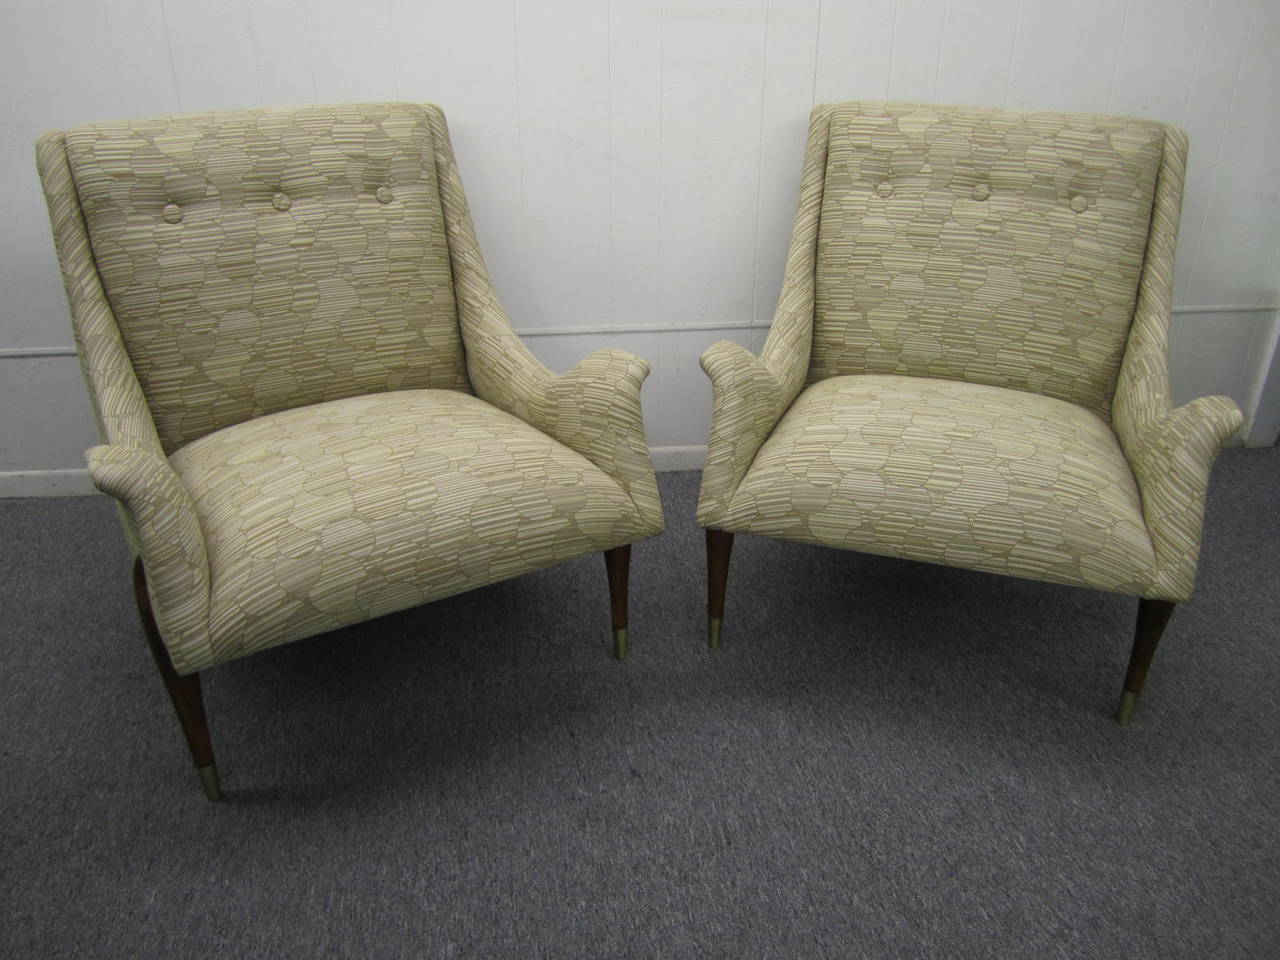 Amazing and rare pair of Gio Ponti style gull wing lounge chairs.  We have never seen another pair of these so they are extremely rare.  These fabulous chairs have been completely restored with lovely high quality knoll fabric and refinished walnut